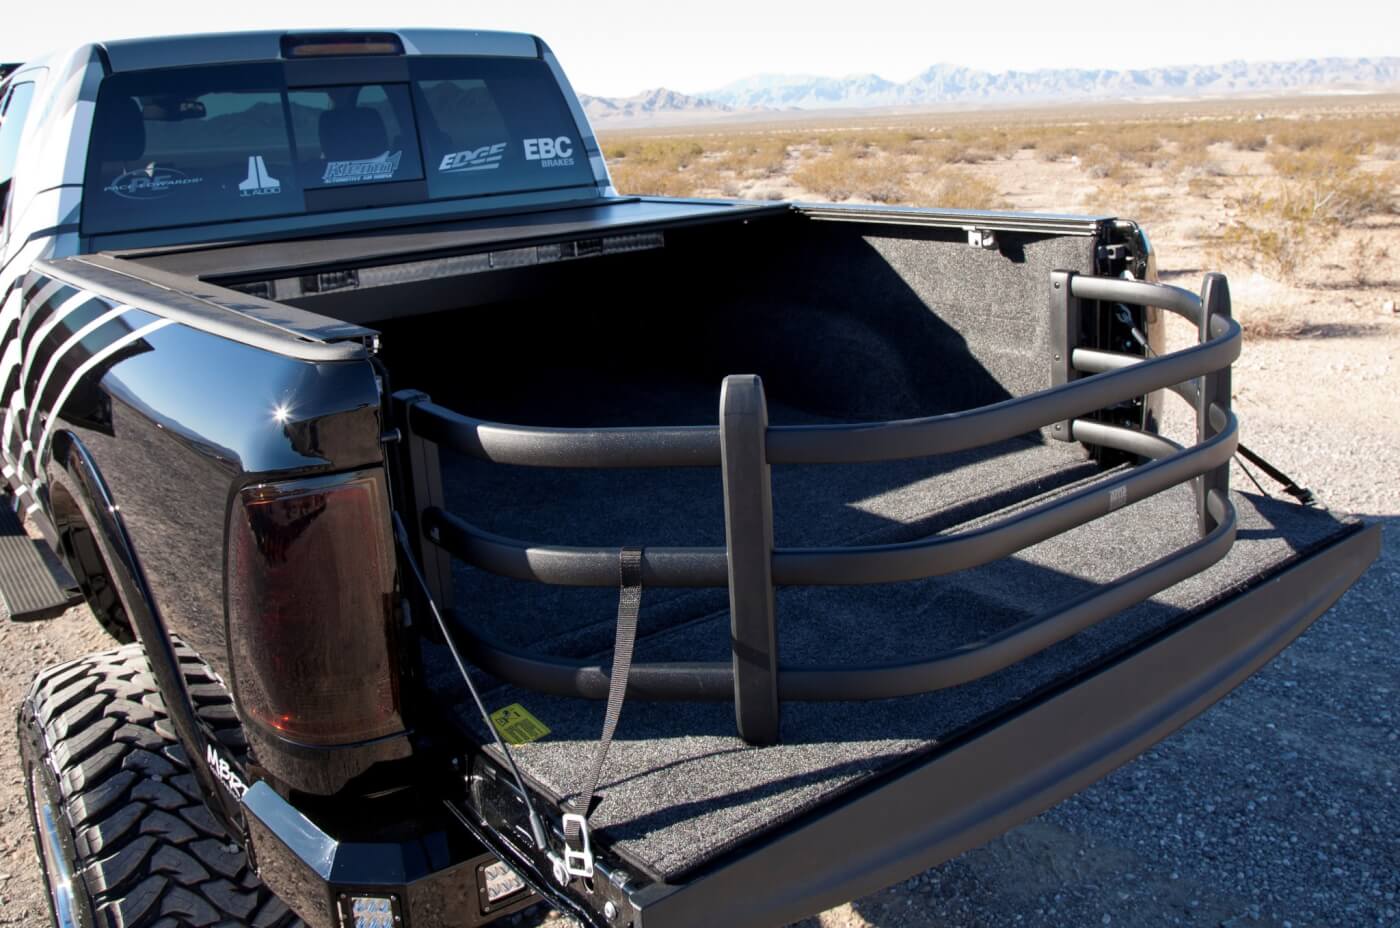 This Amp Research Bed Xtender helps keep bikes and other gear in when the tailgate is down, but folds in or can be removed as needed. The bed also features a Bed Rug bed lining. Pace Edwards power bed cover and M2 Fab, twin in-bed mountain bike mounts.